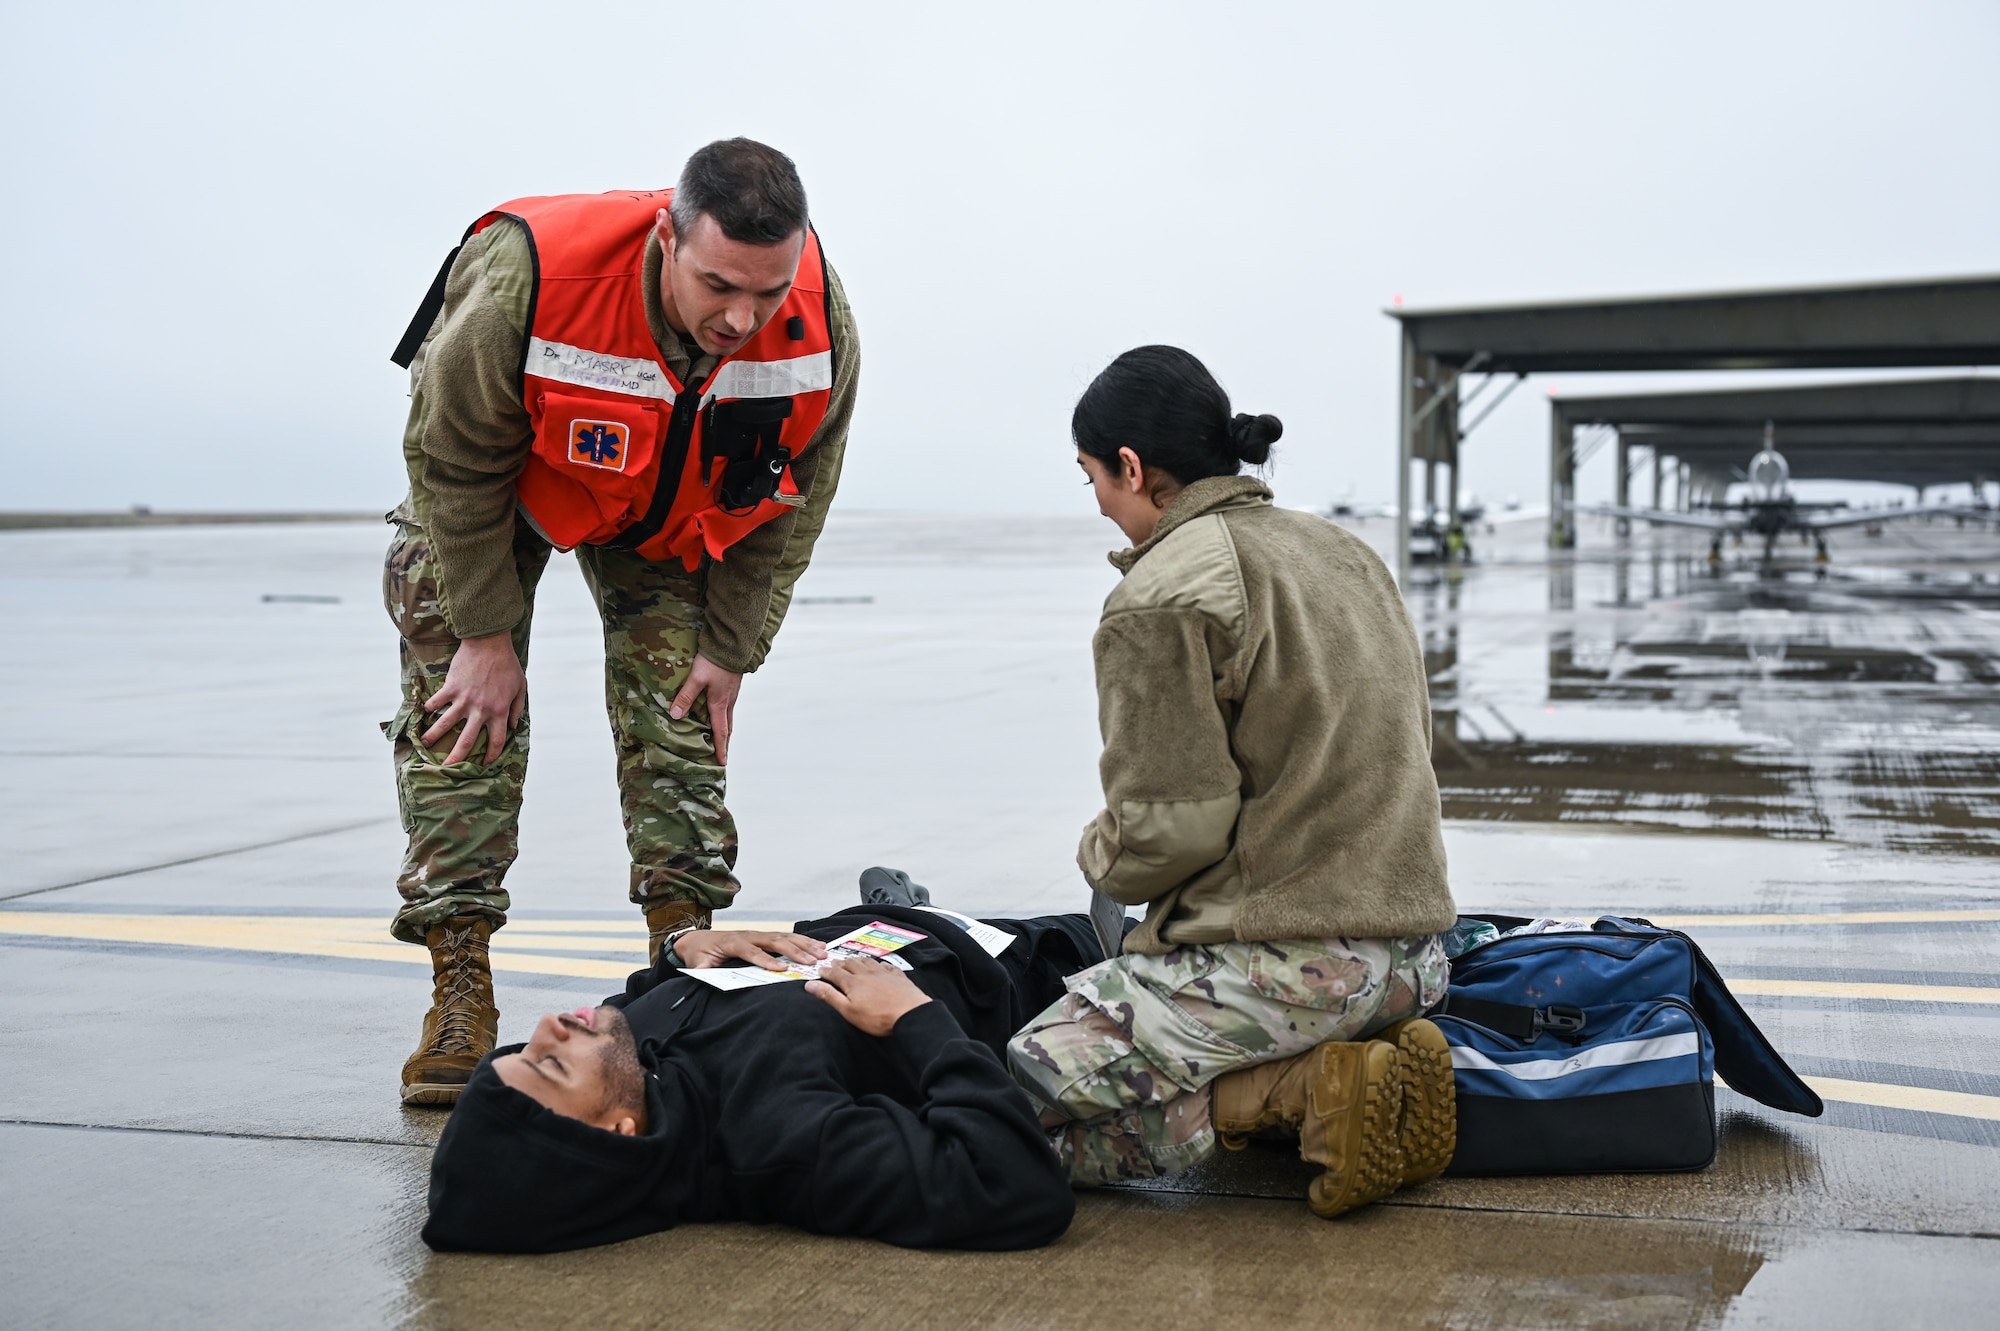 U.S. Air Force Capt. Colin Sulpizio (left), 47th Medical Group family physician, and Airman Veronica Perez (right), 47th MDG outpatient records technician, treat a simulated injured person during a Major Accident Response Exercise (MARE) on the flight line at Laughlin Air Force Base, Texas, Dec. 14, 2023